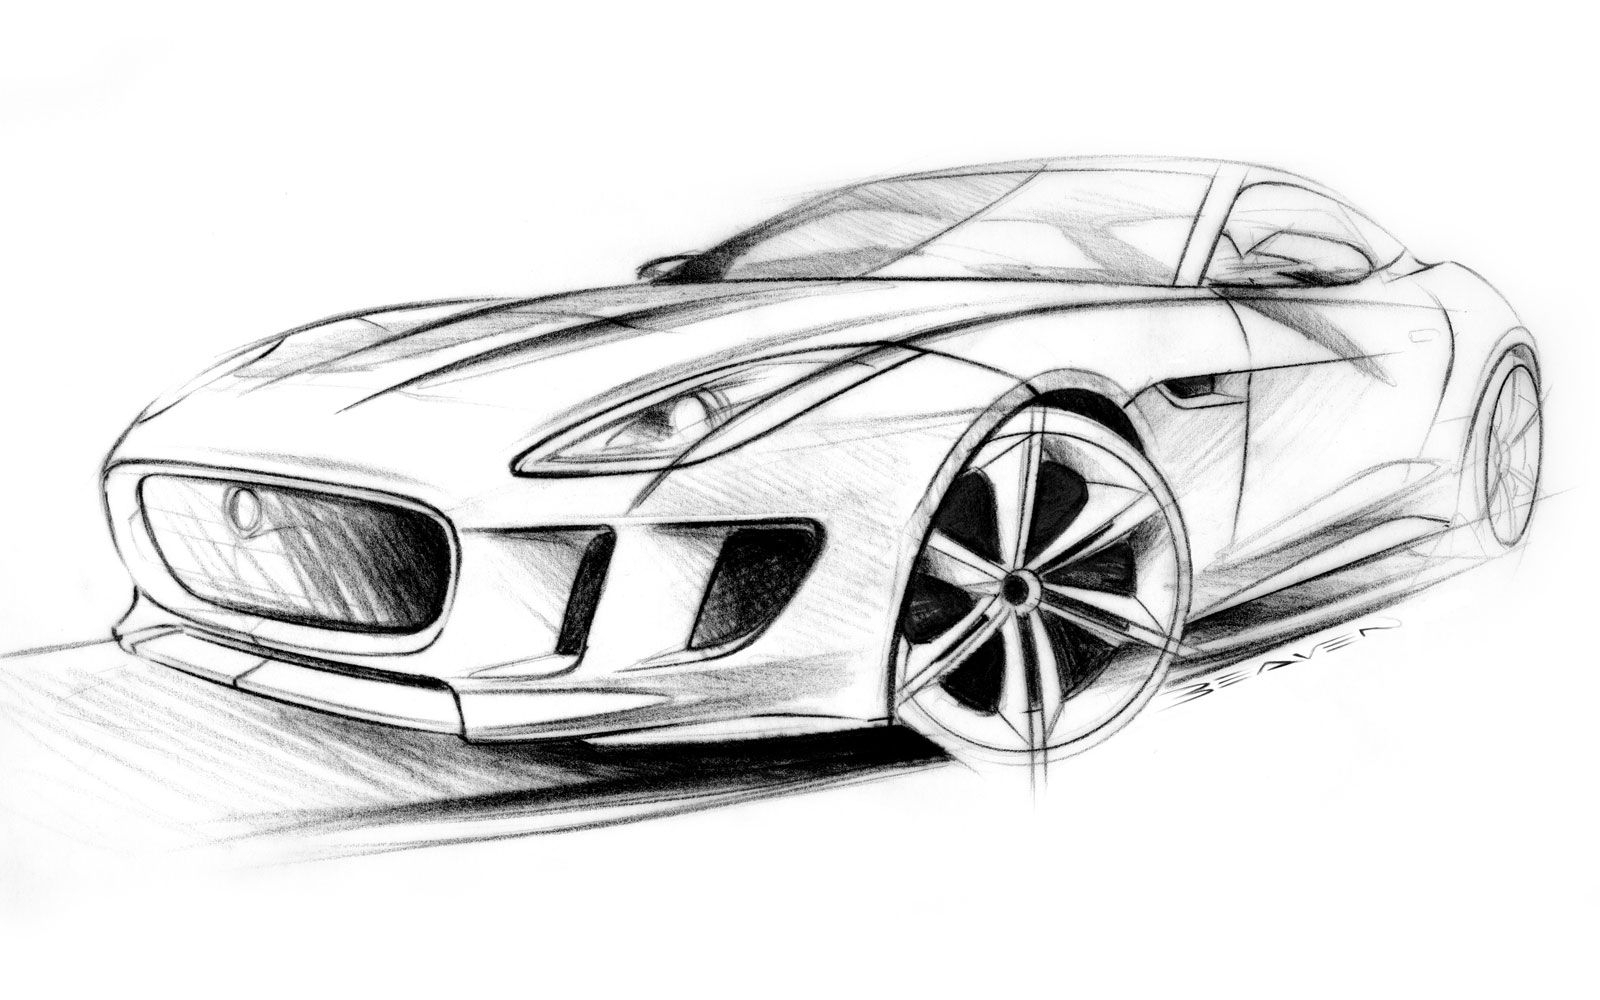 Cute How To Draw Concept Car Sketches for Adult